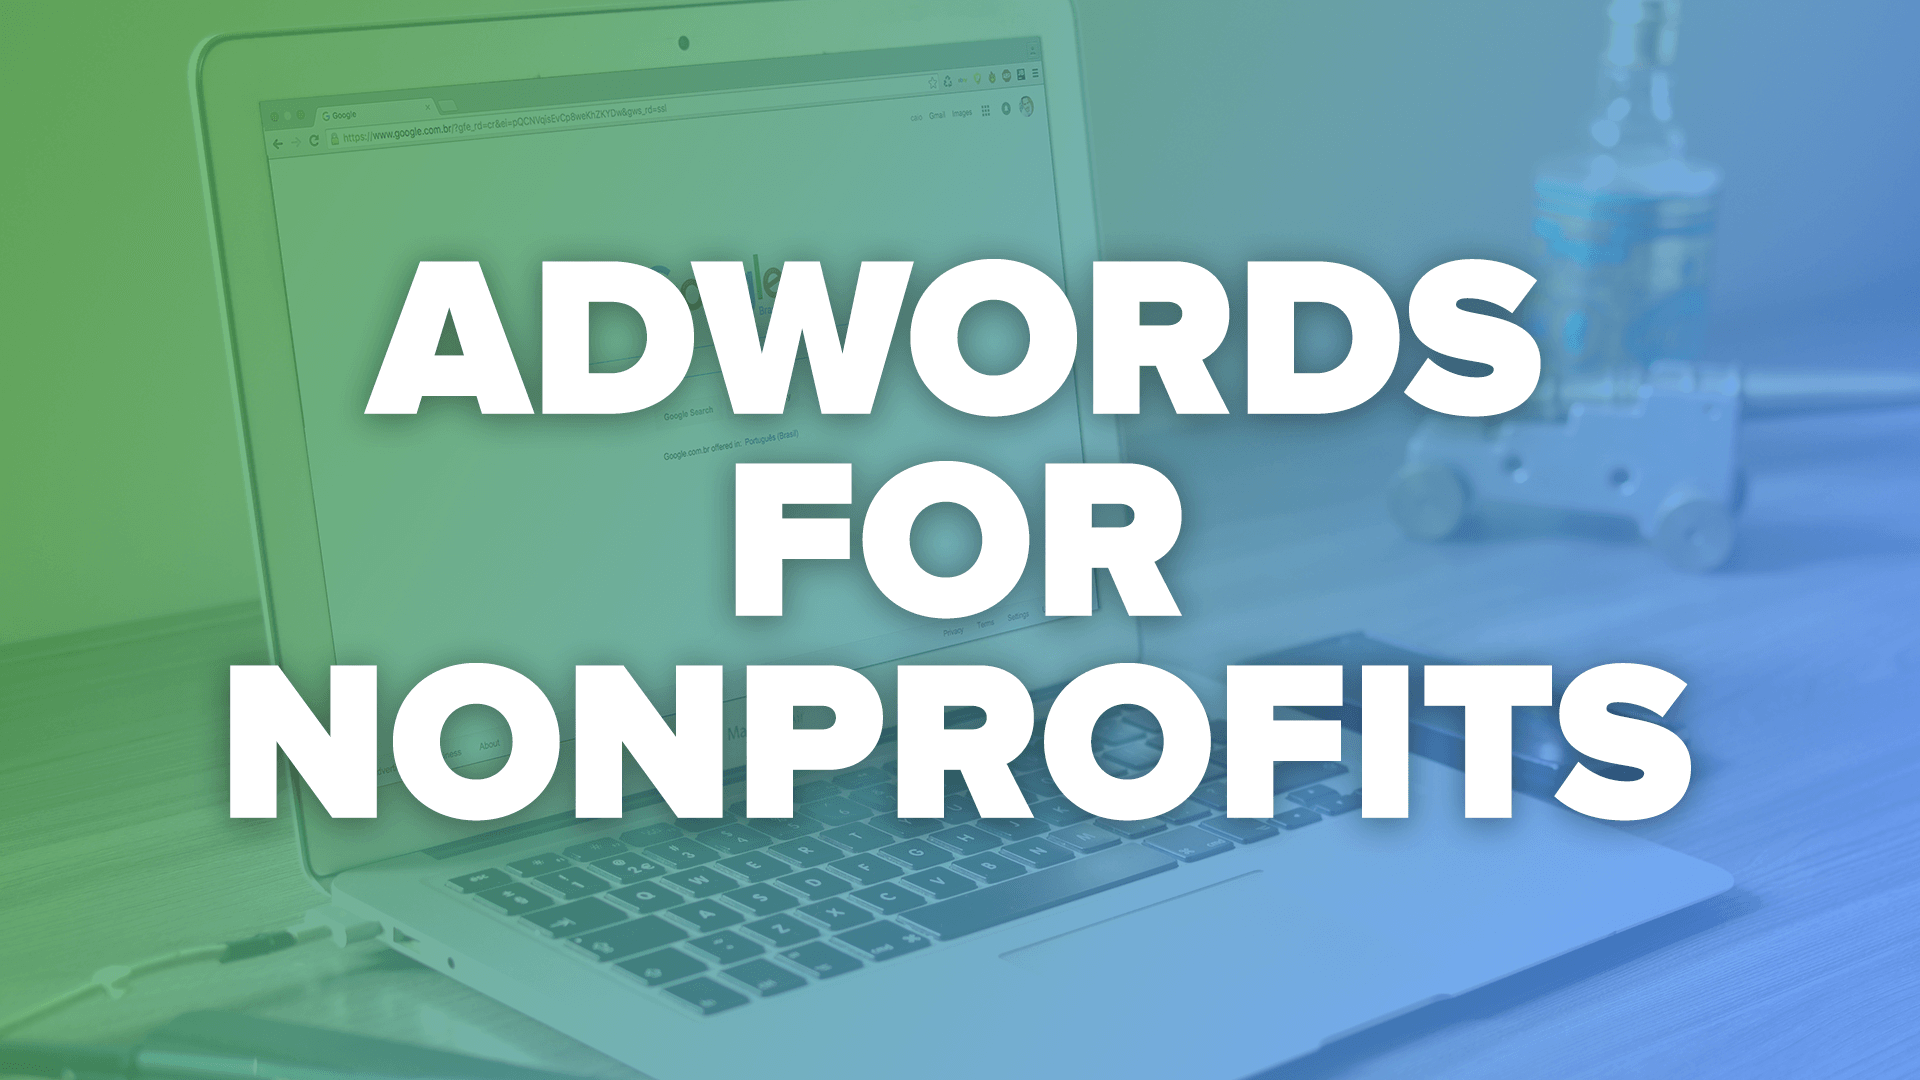 AdWords for Nonprofits – How to Get Half a Million Dollars in Free Ads